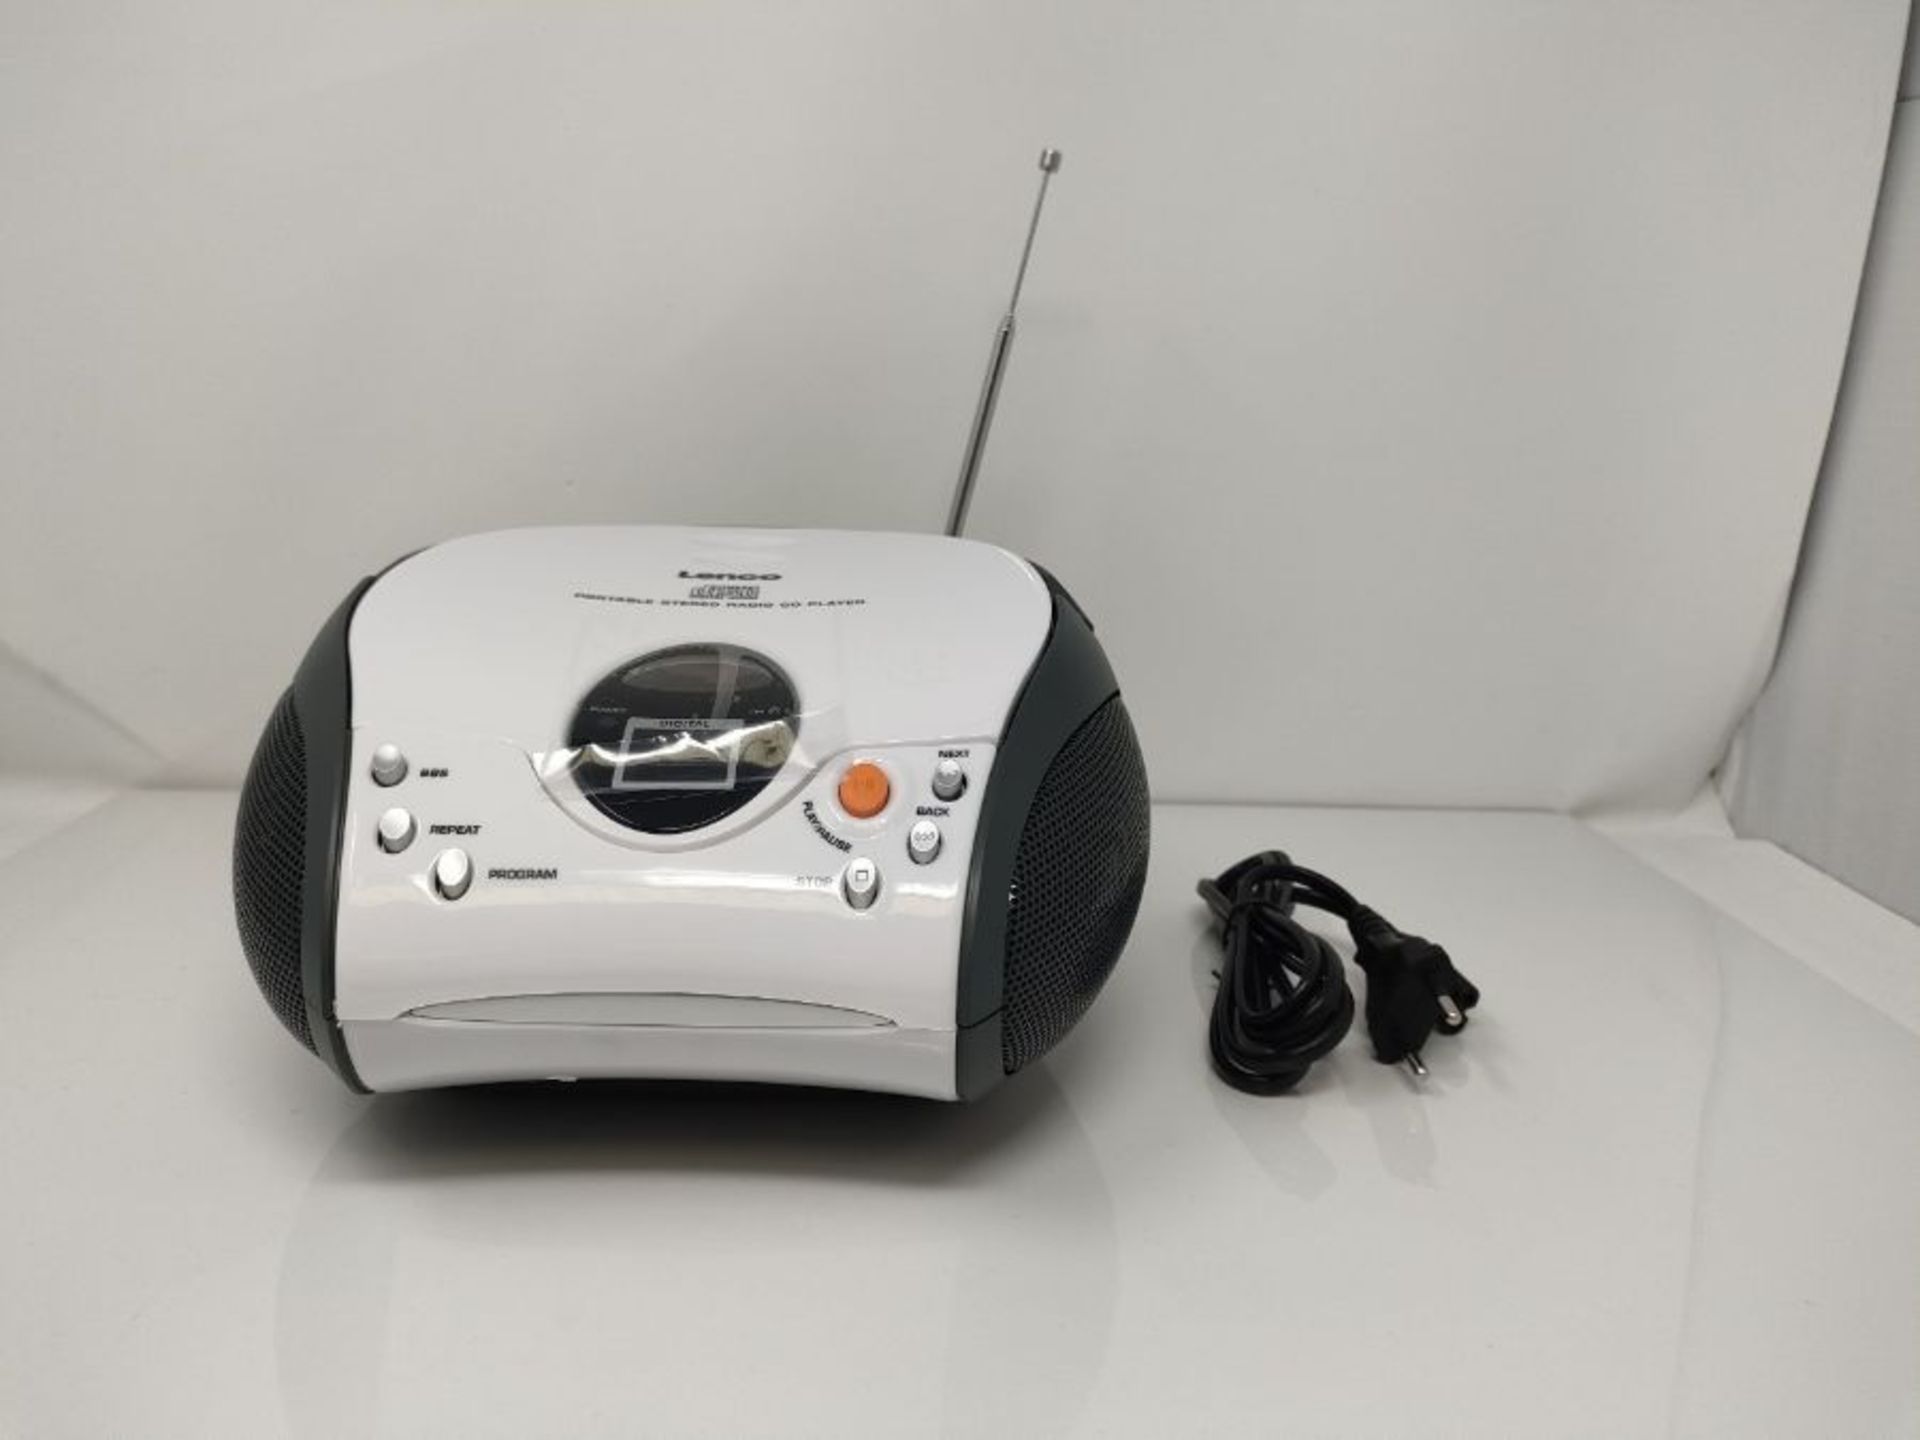 Lenco SCD-24 Portable Stereo Boombox with Programmable CD Player & FM Radio - Black & - Image 3 of 3